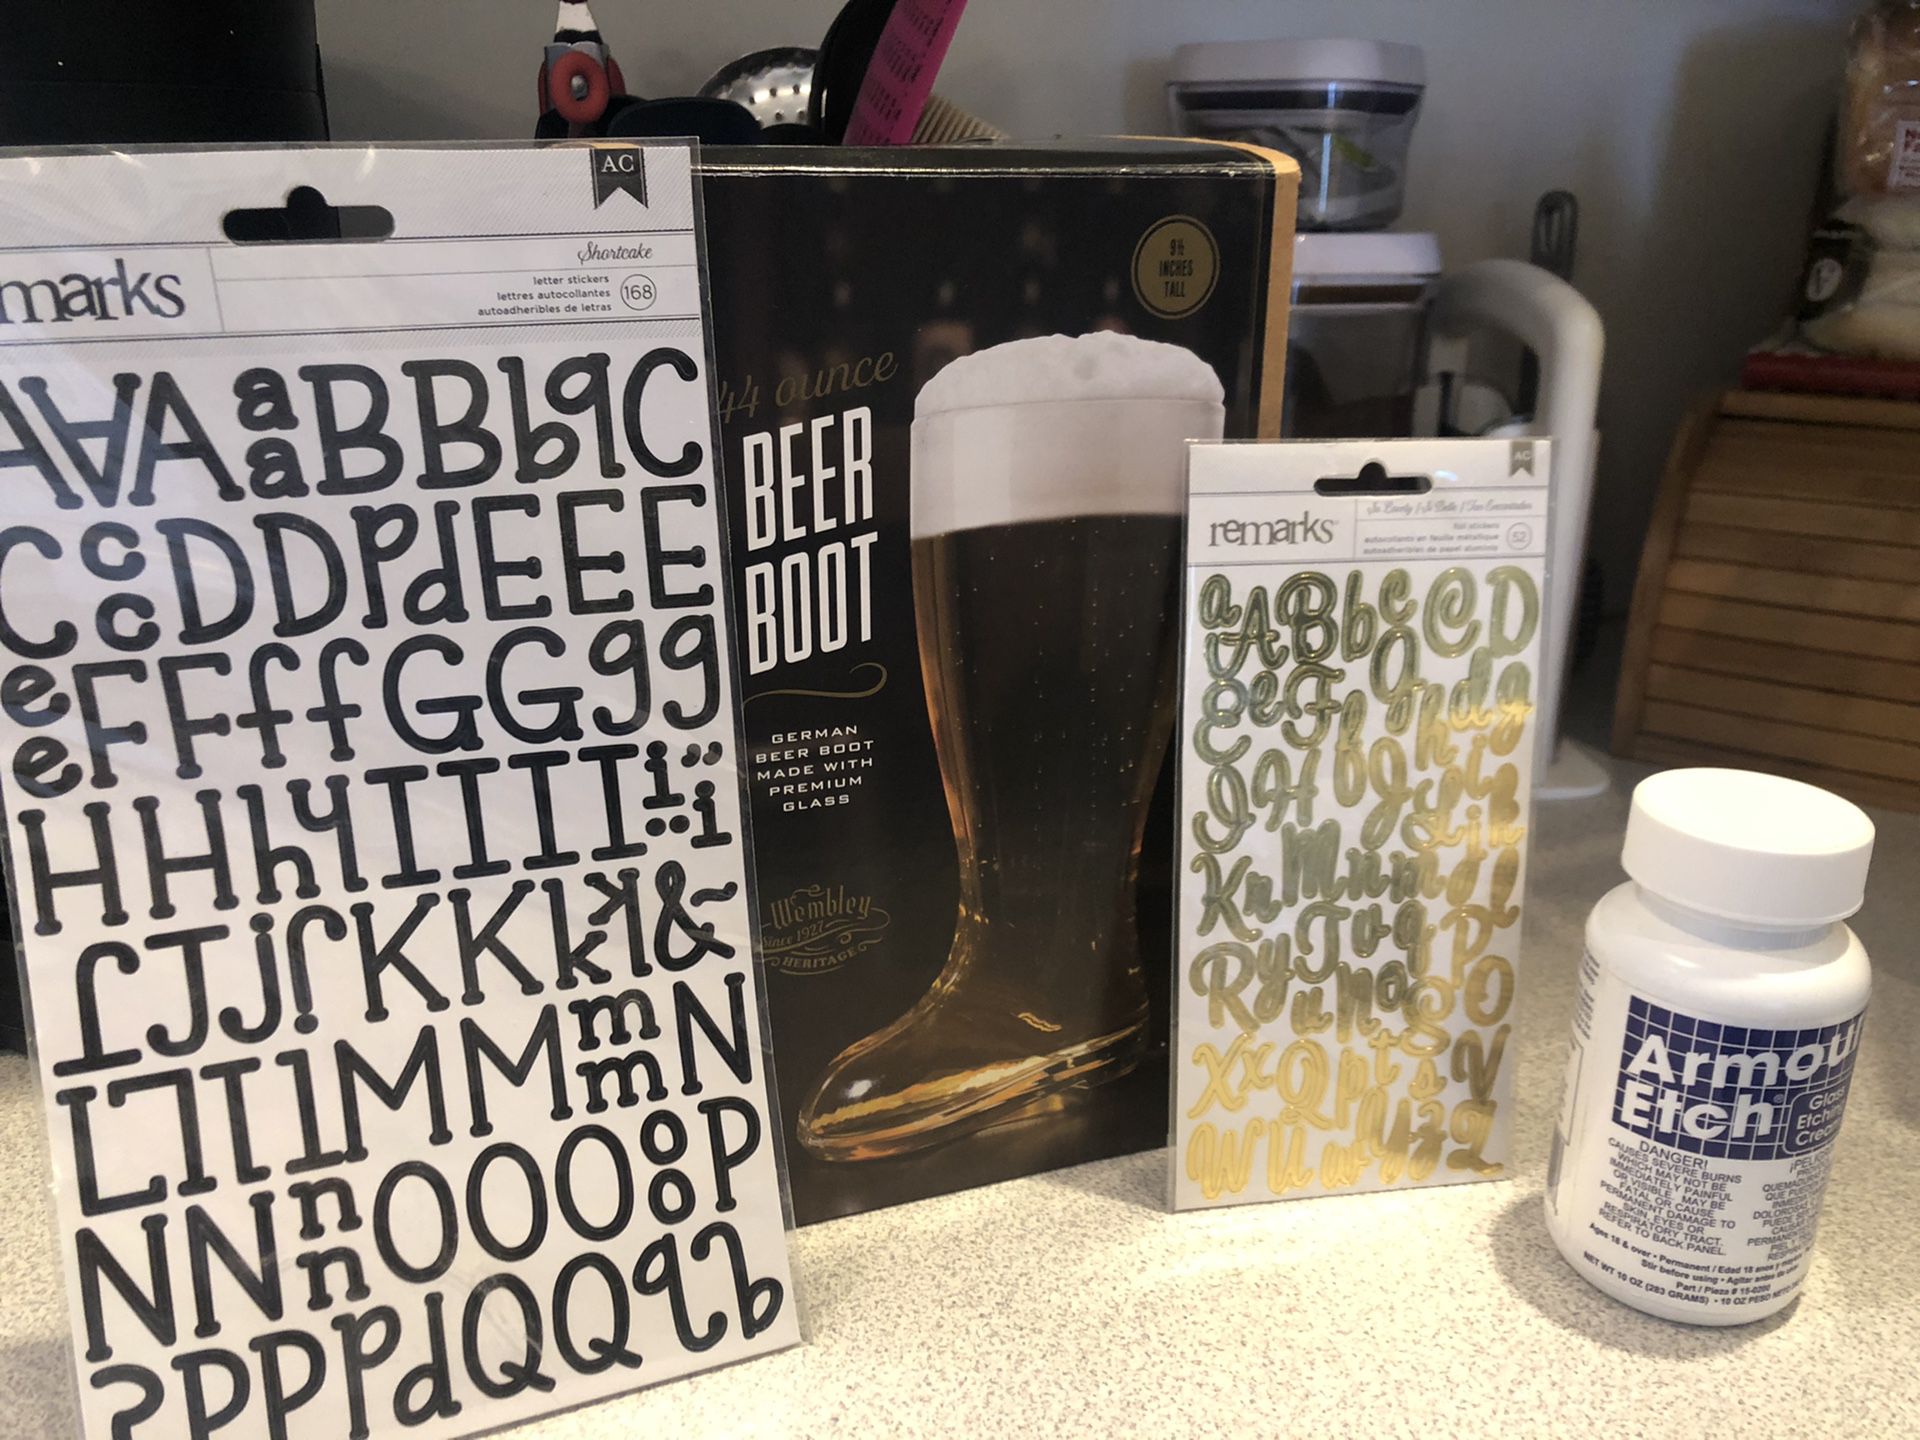 German Glass Beer Boot Project